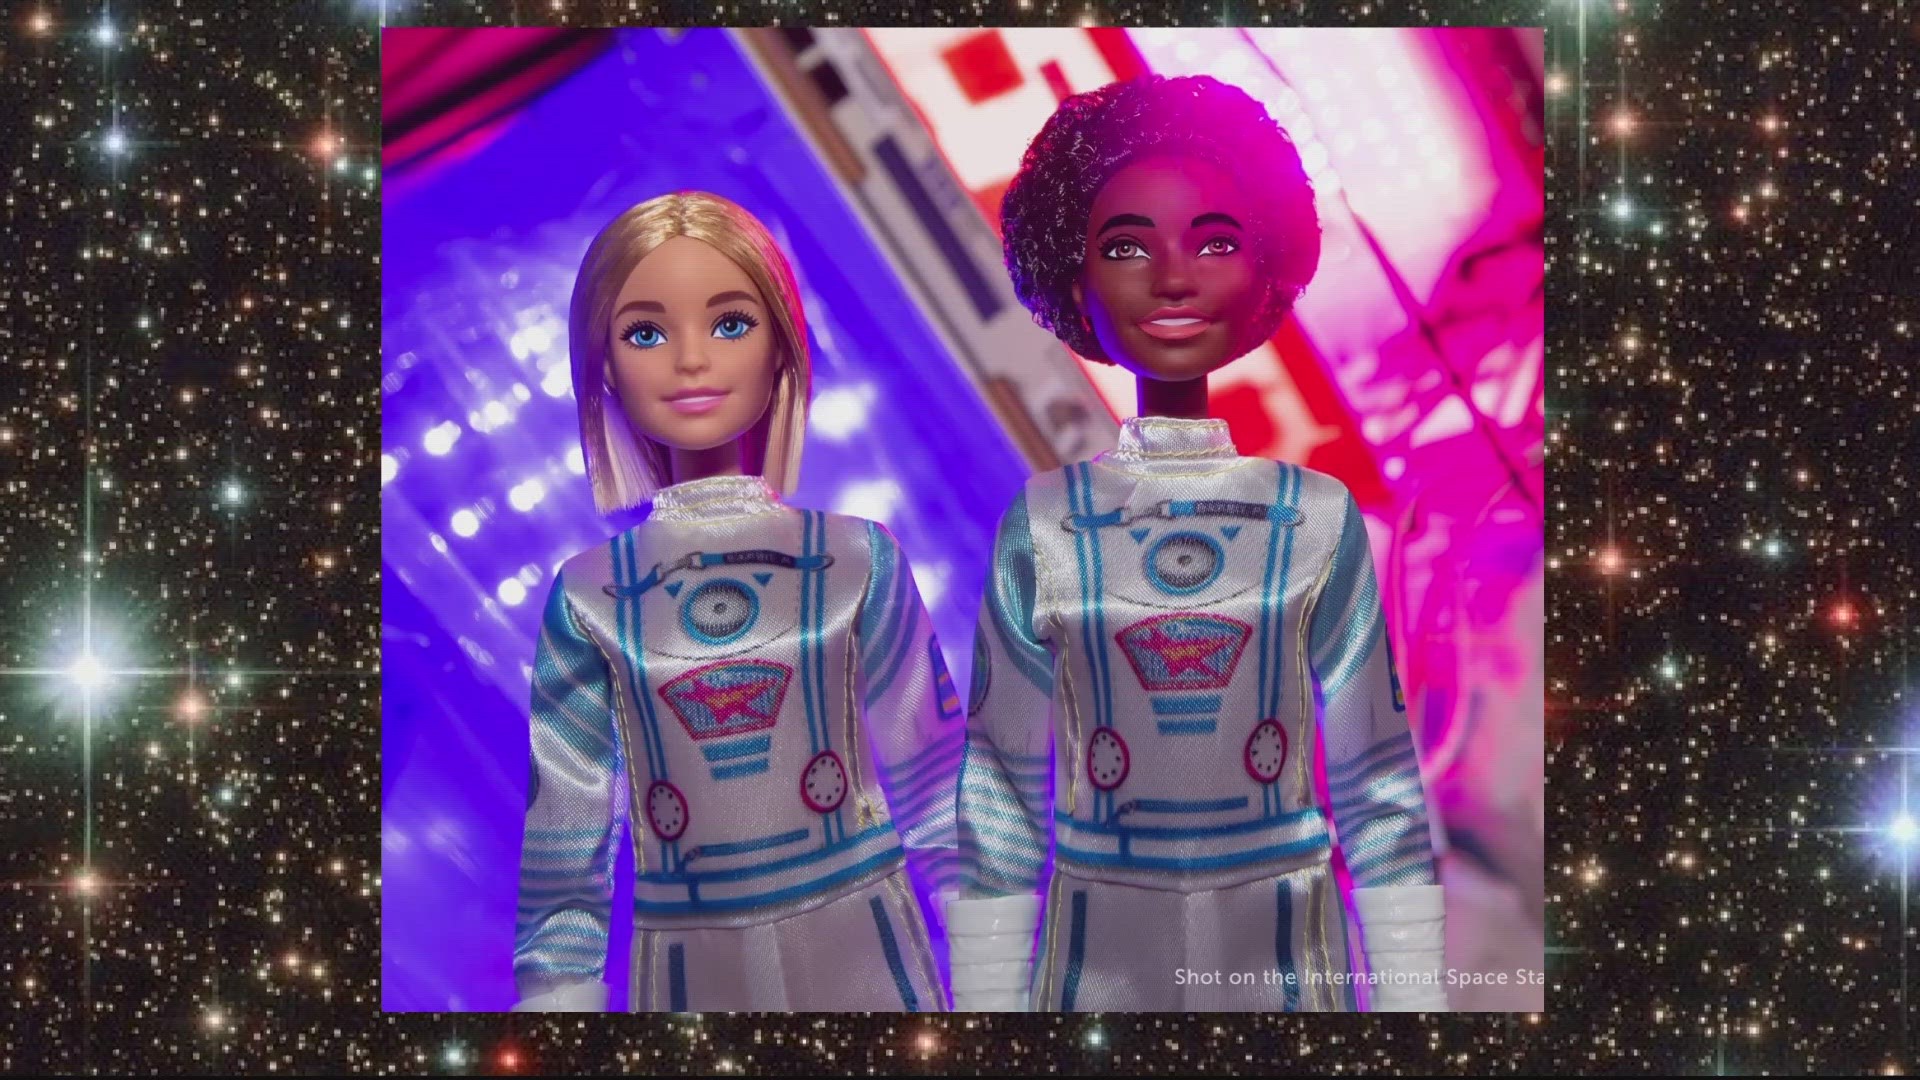 The Barbies are now on display at the Smithsonian's Air & Space Museum